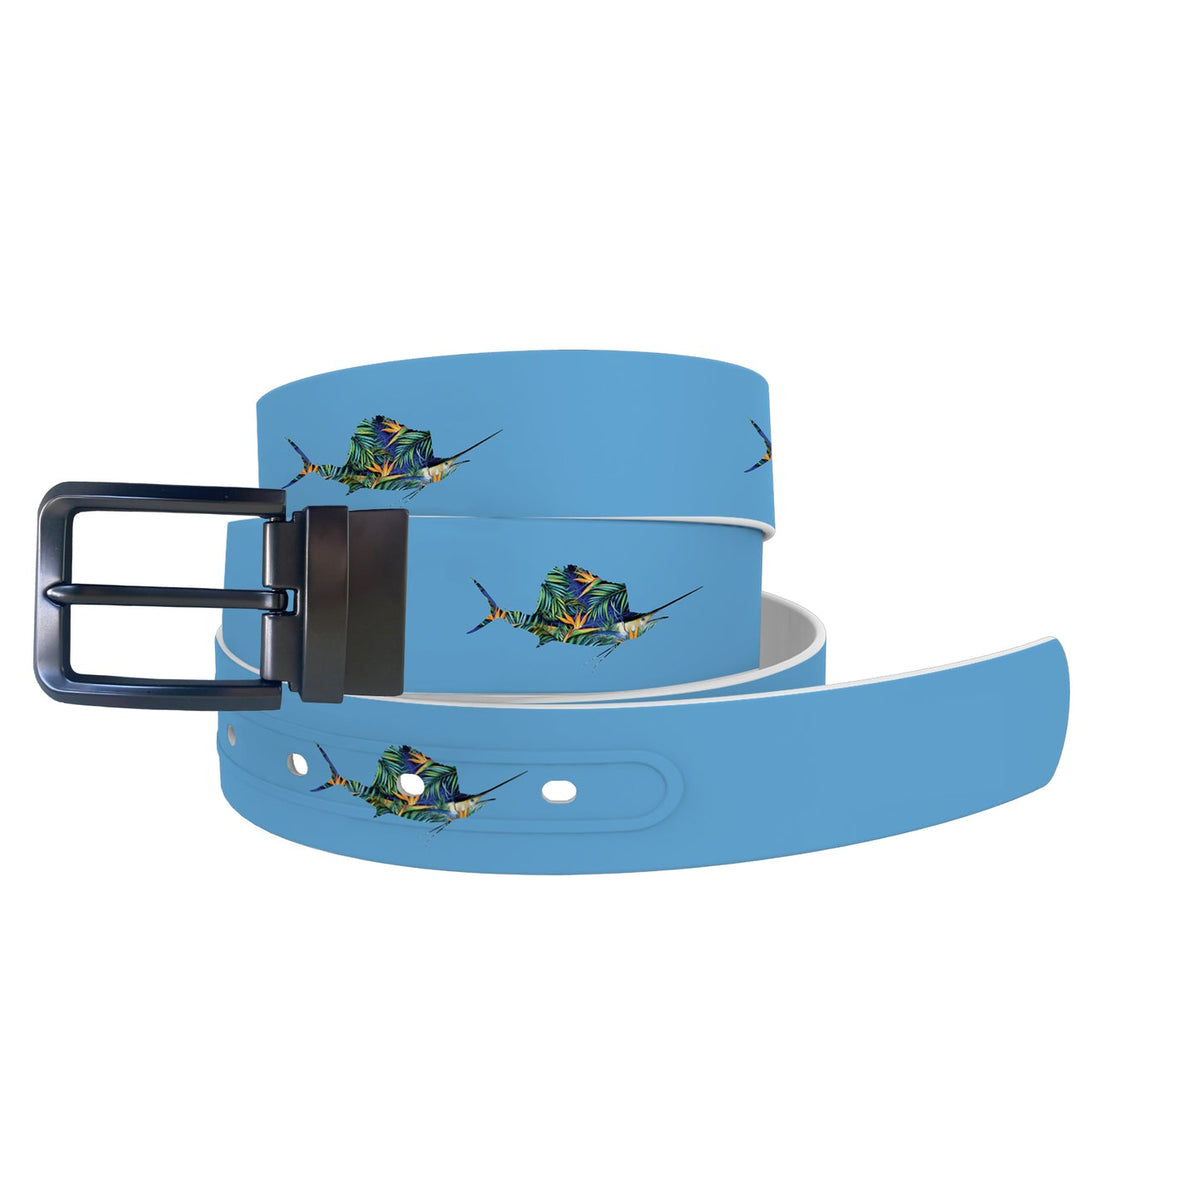 SCALES Fly Sail Belt